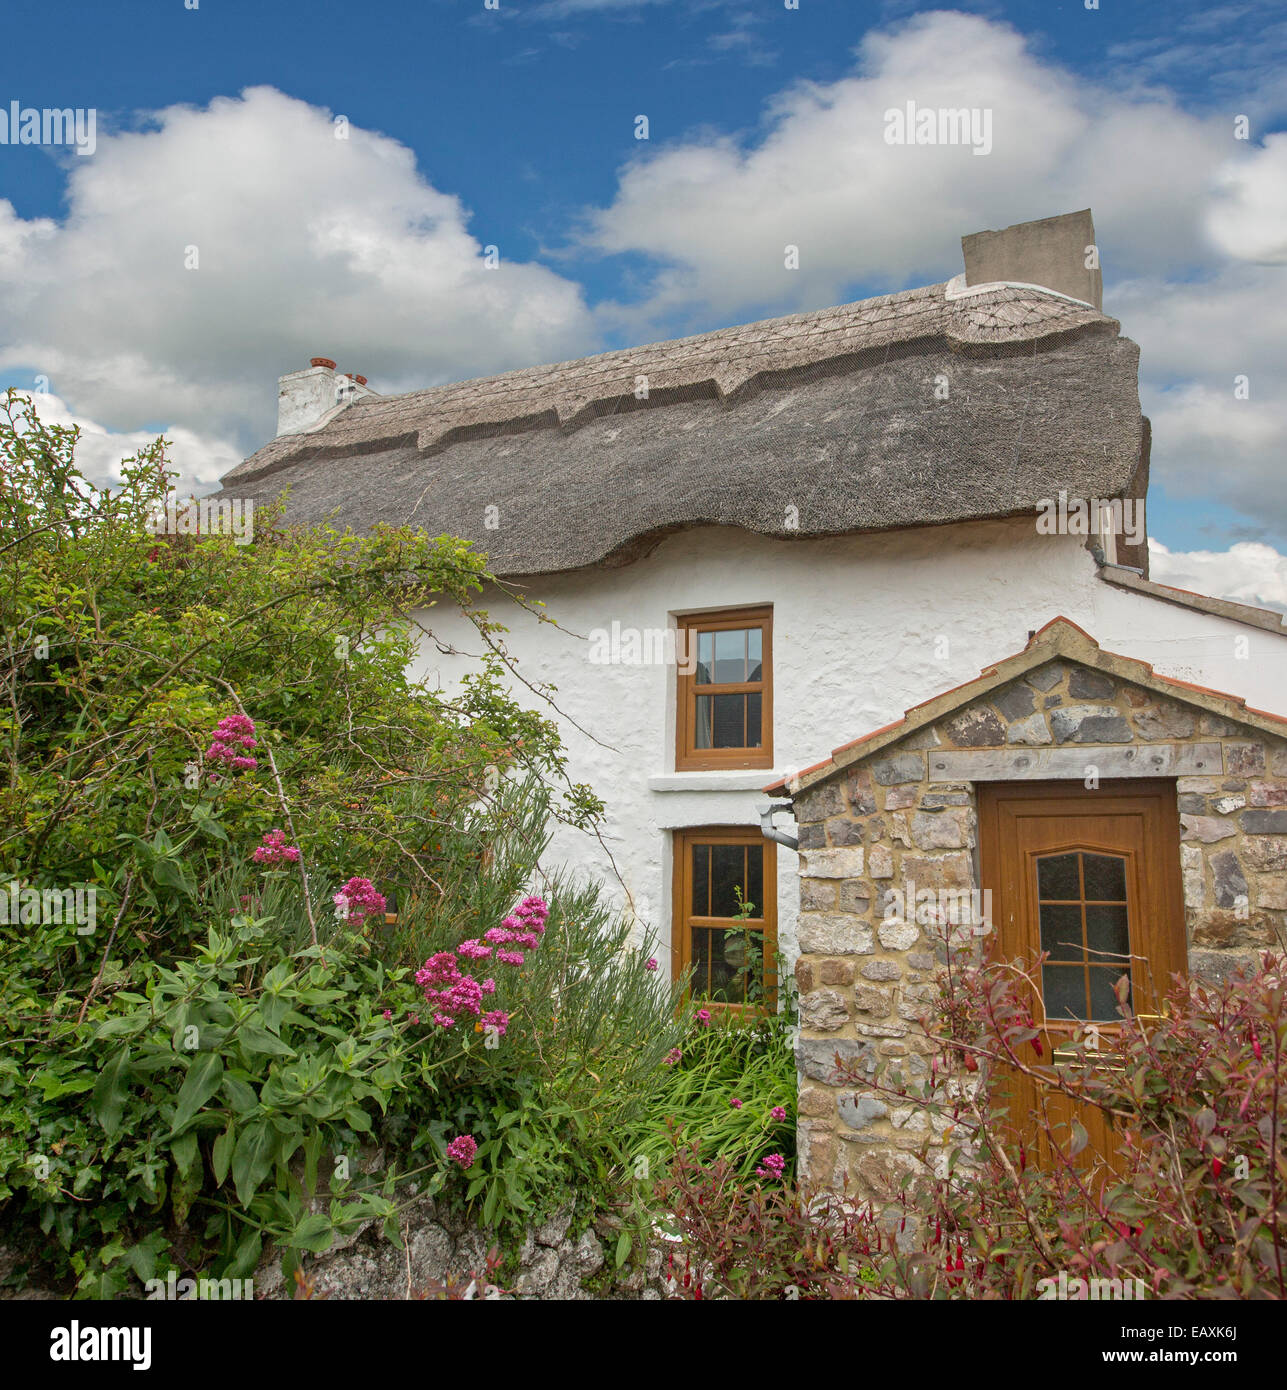 White painted cottage with thatched roof, small stone doorway & colourful flowering shrubs under blue sky at Port Eynon, Wales Stock Photo